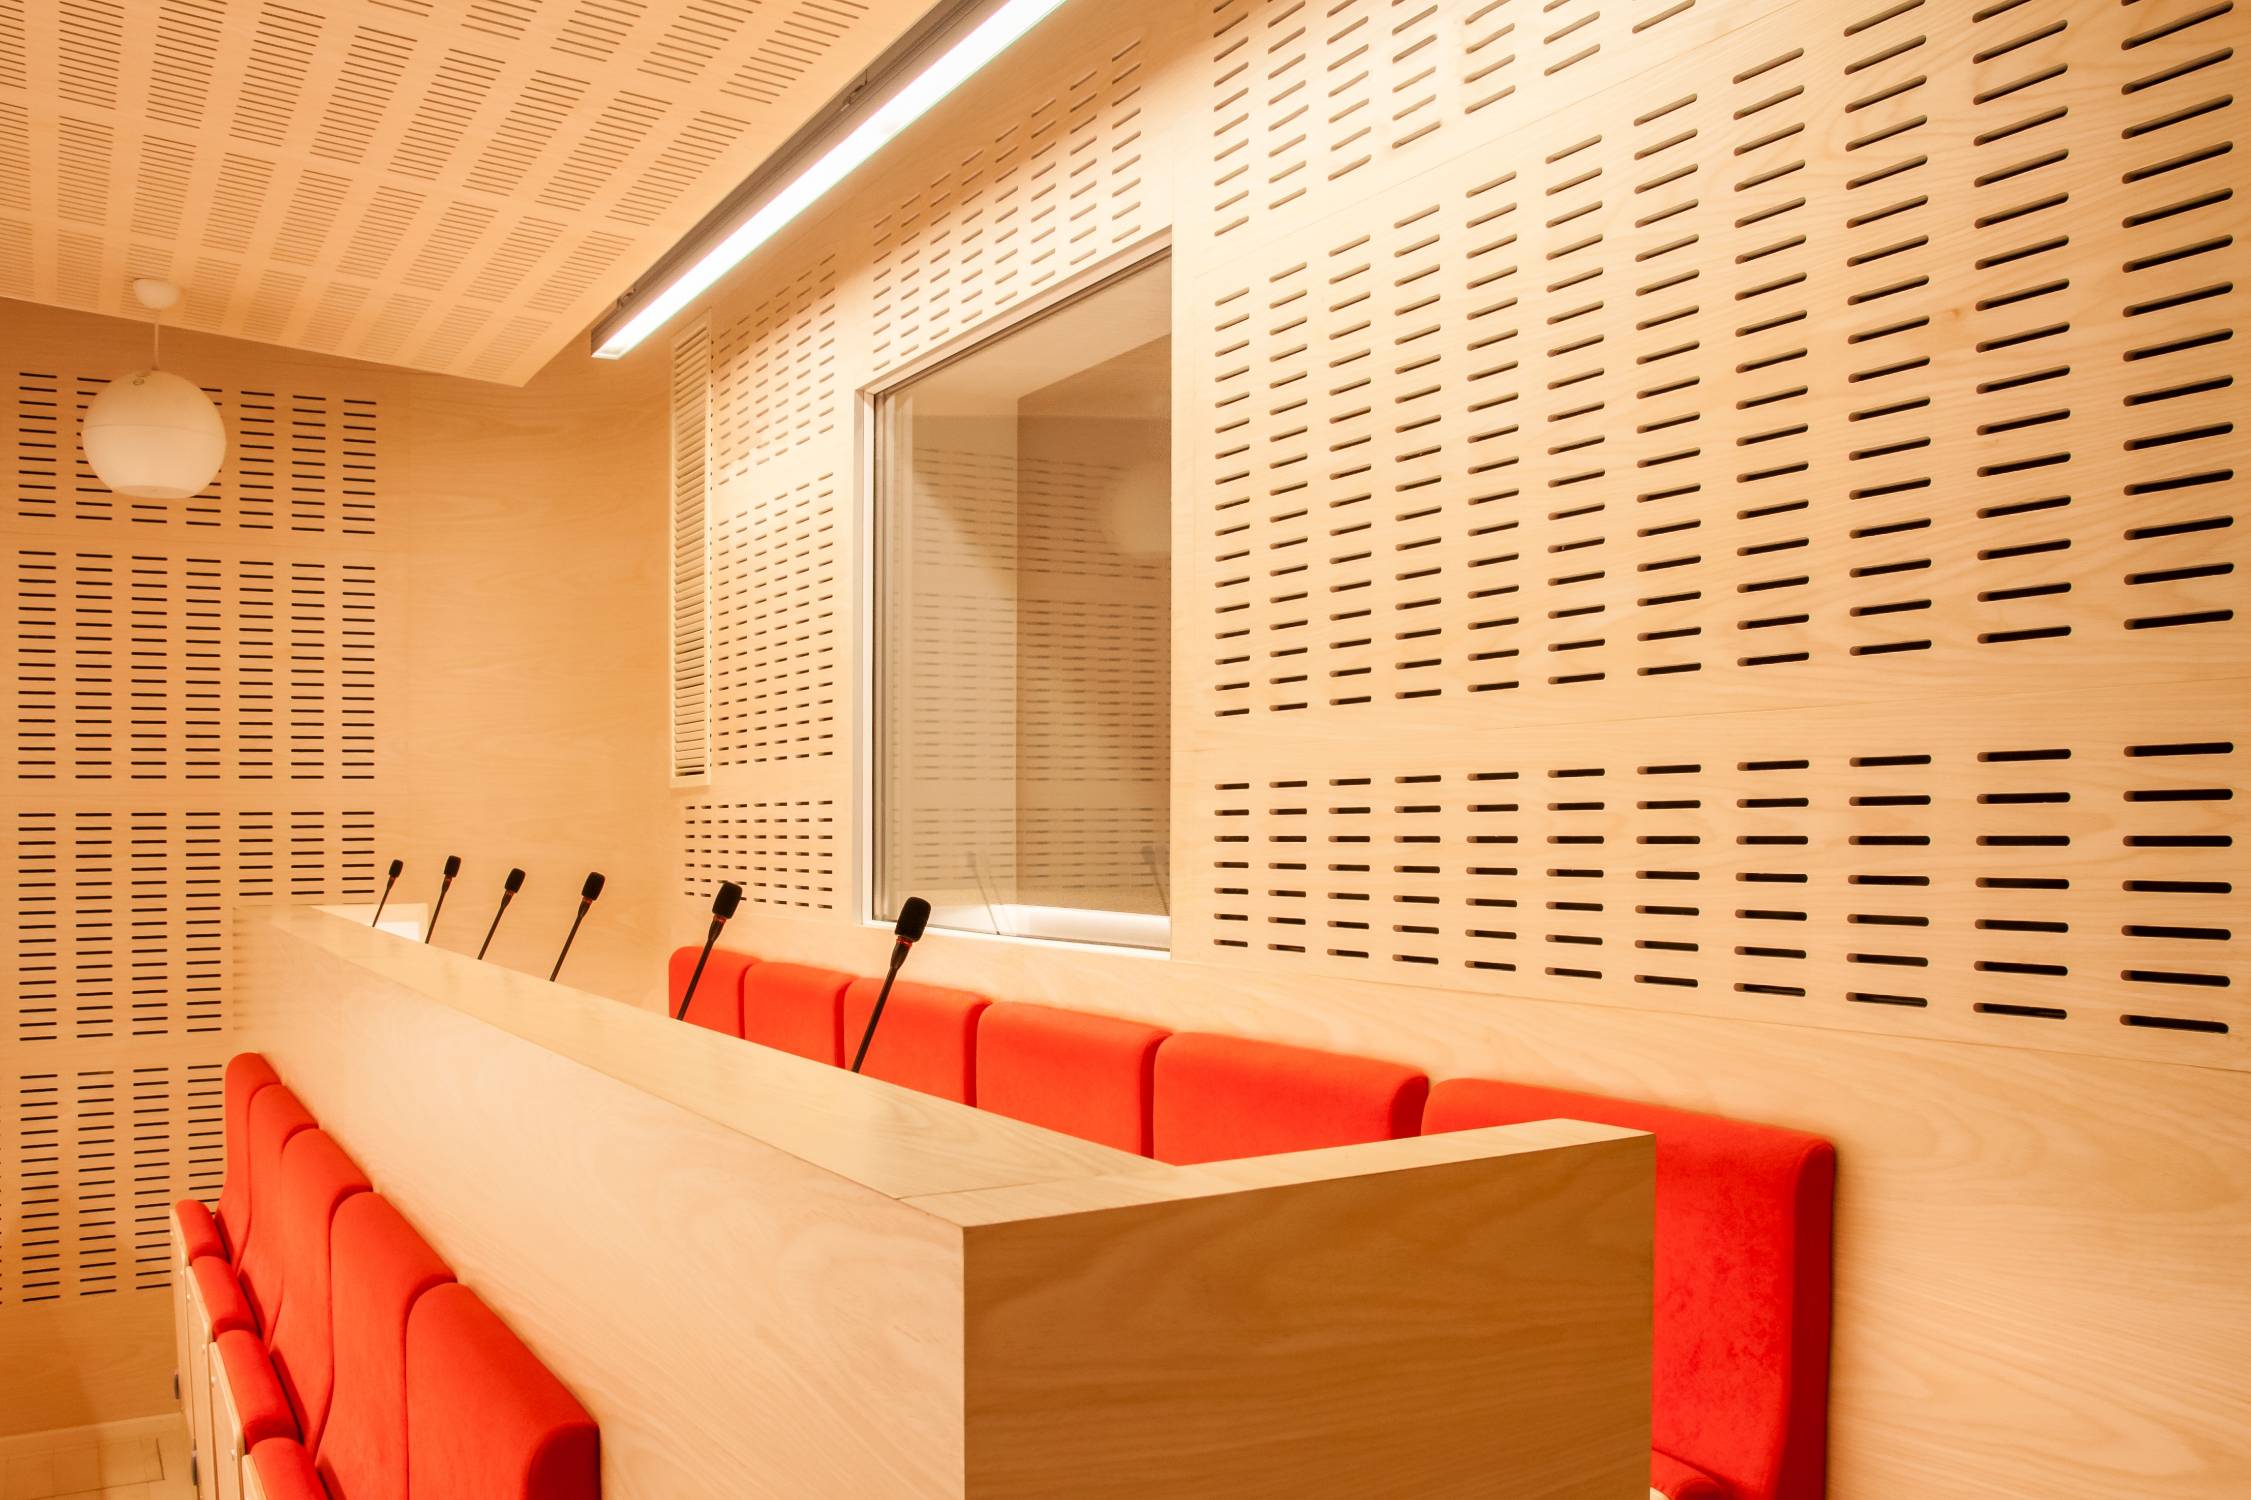 Absorb-R WoodTec Perforated Ceiling - Perforated Acoustic Panel